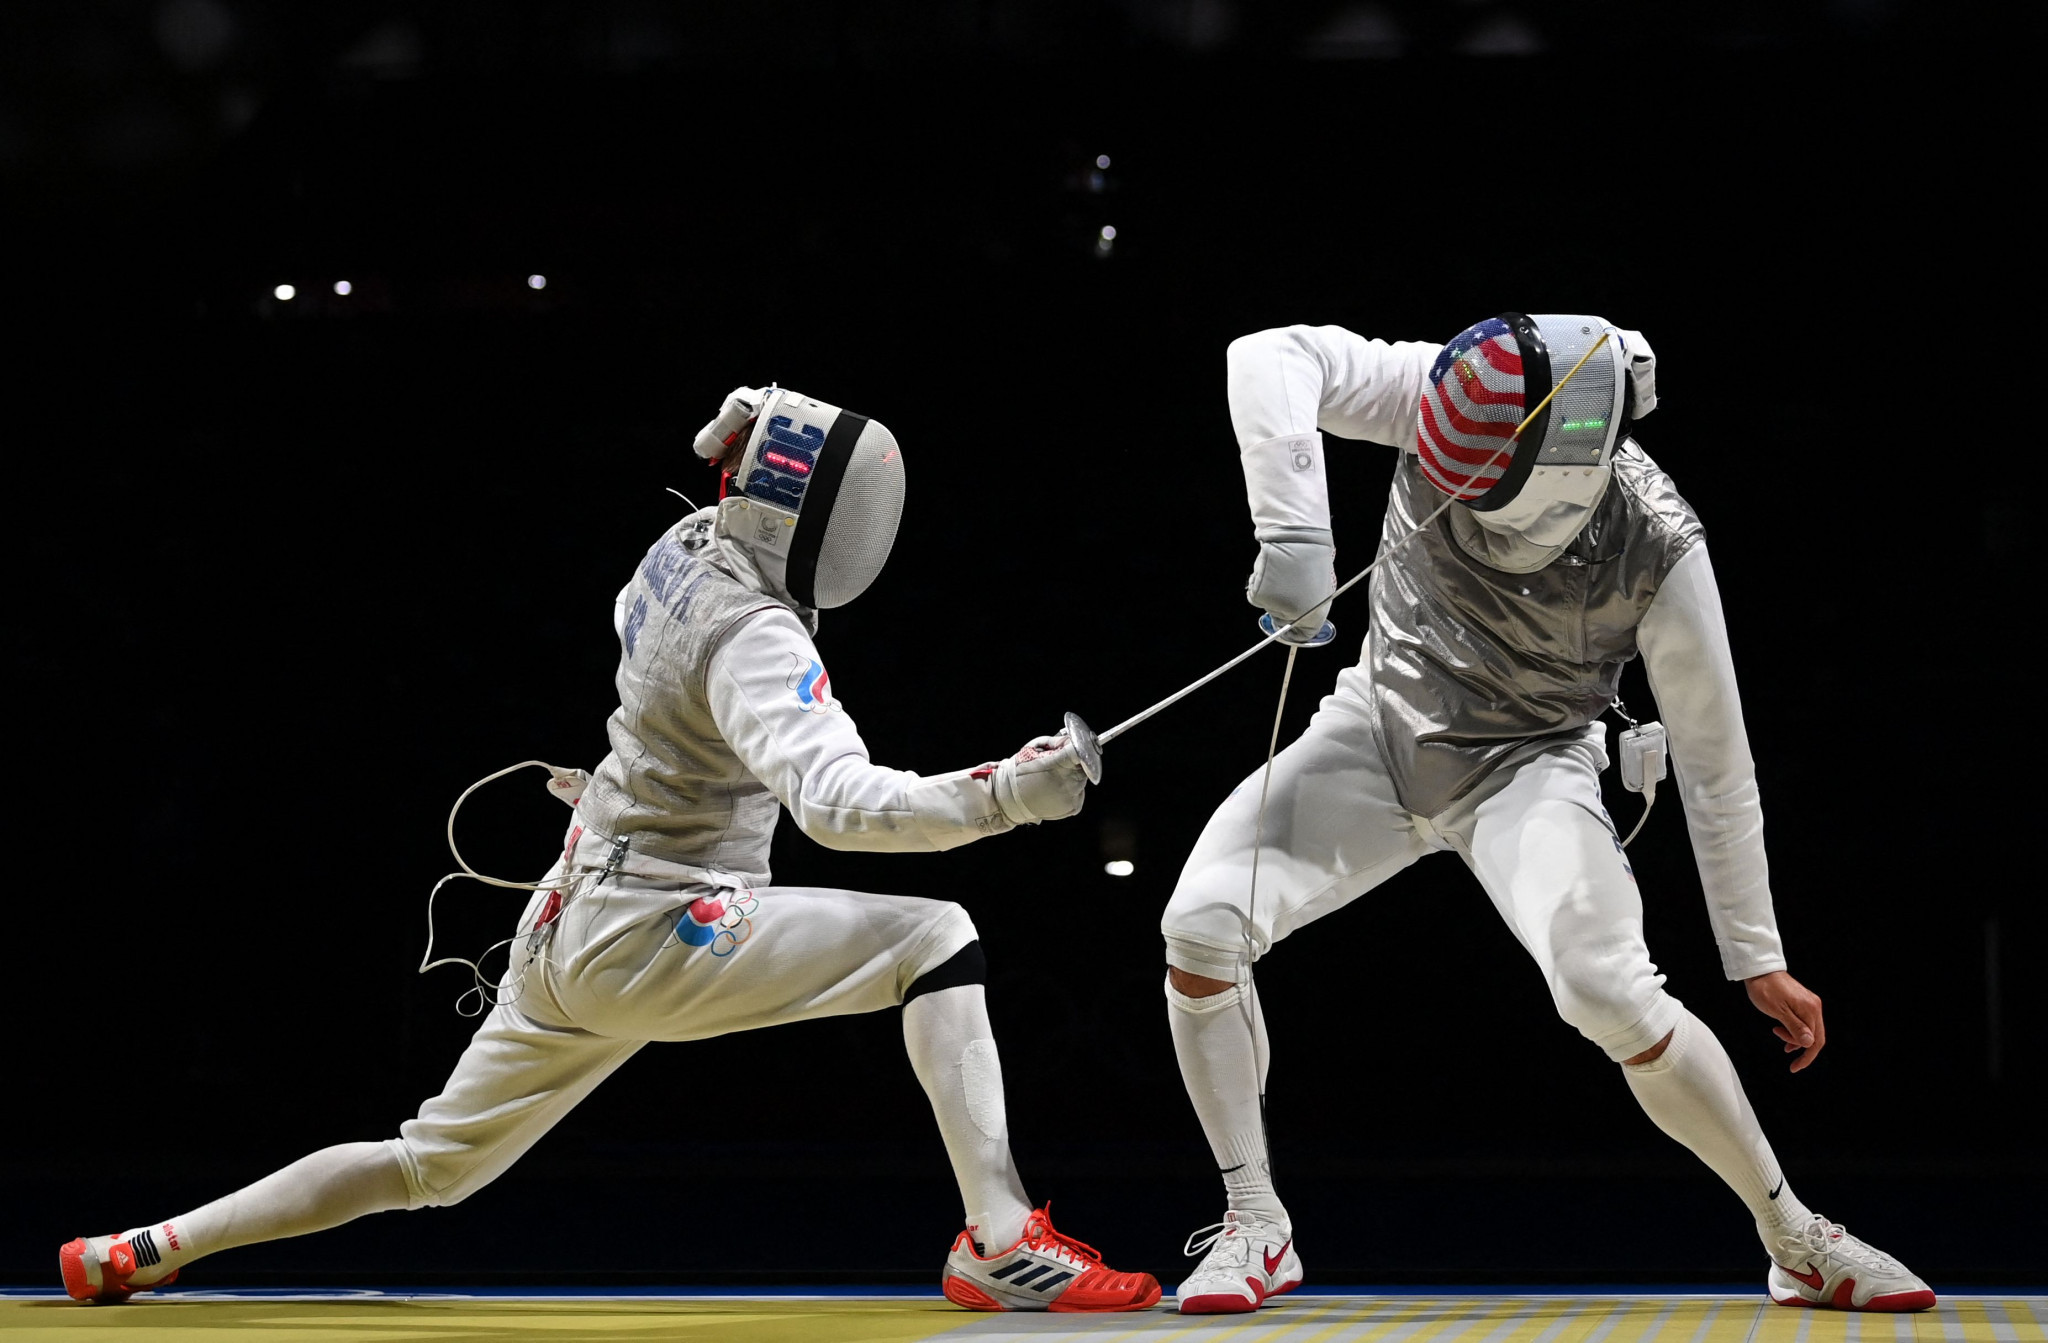 USA Fencing's member wellness programme is open to athletes, coaches, officials and other members of the national governing body ©Getty Images